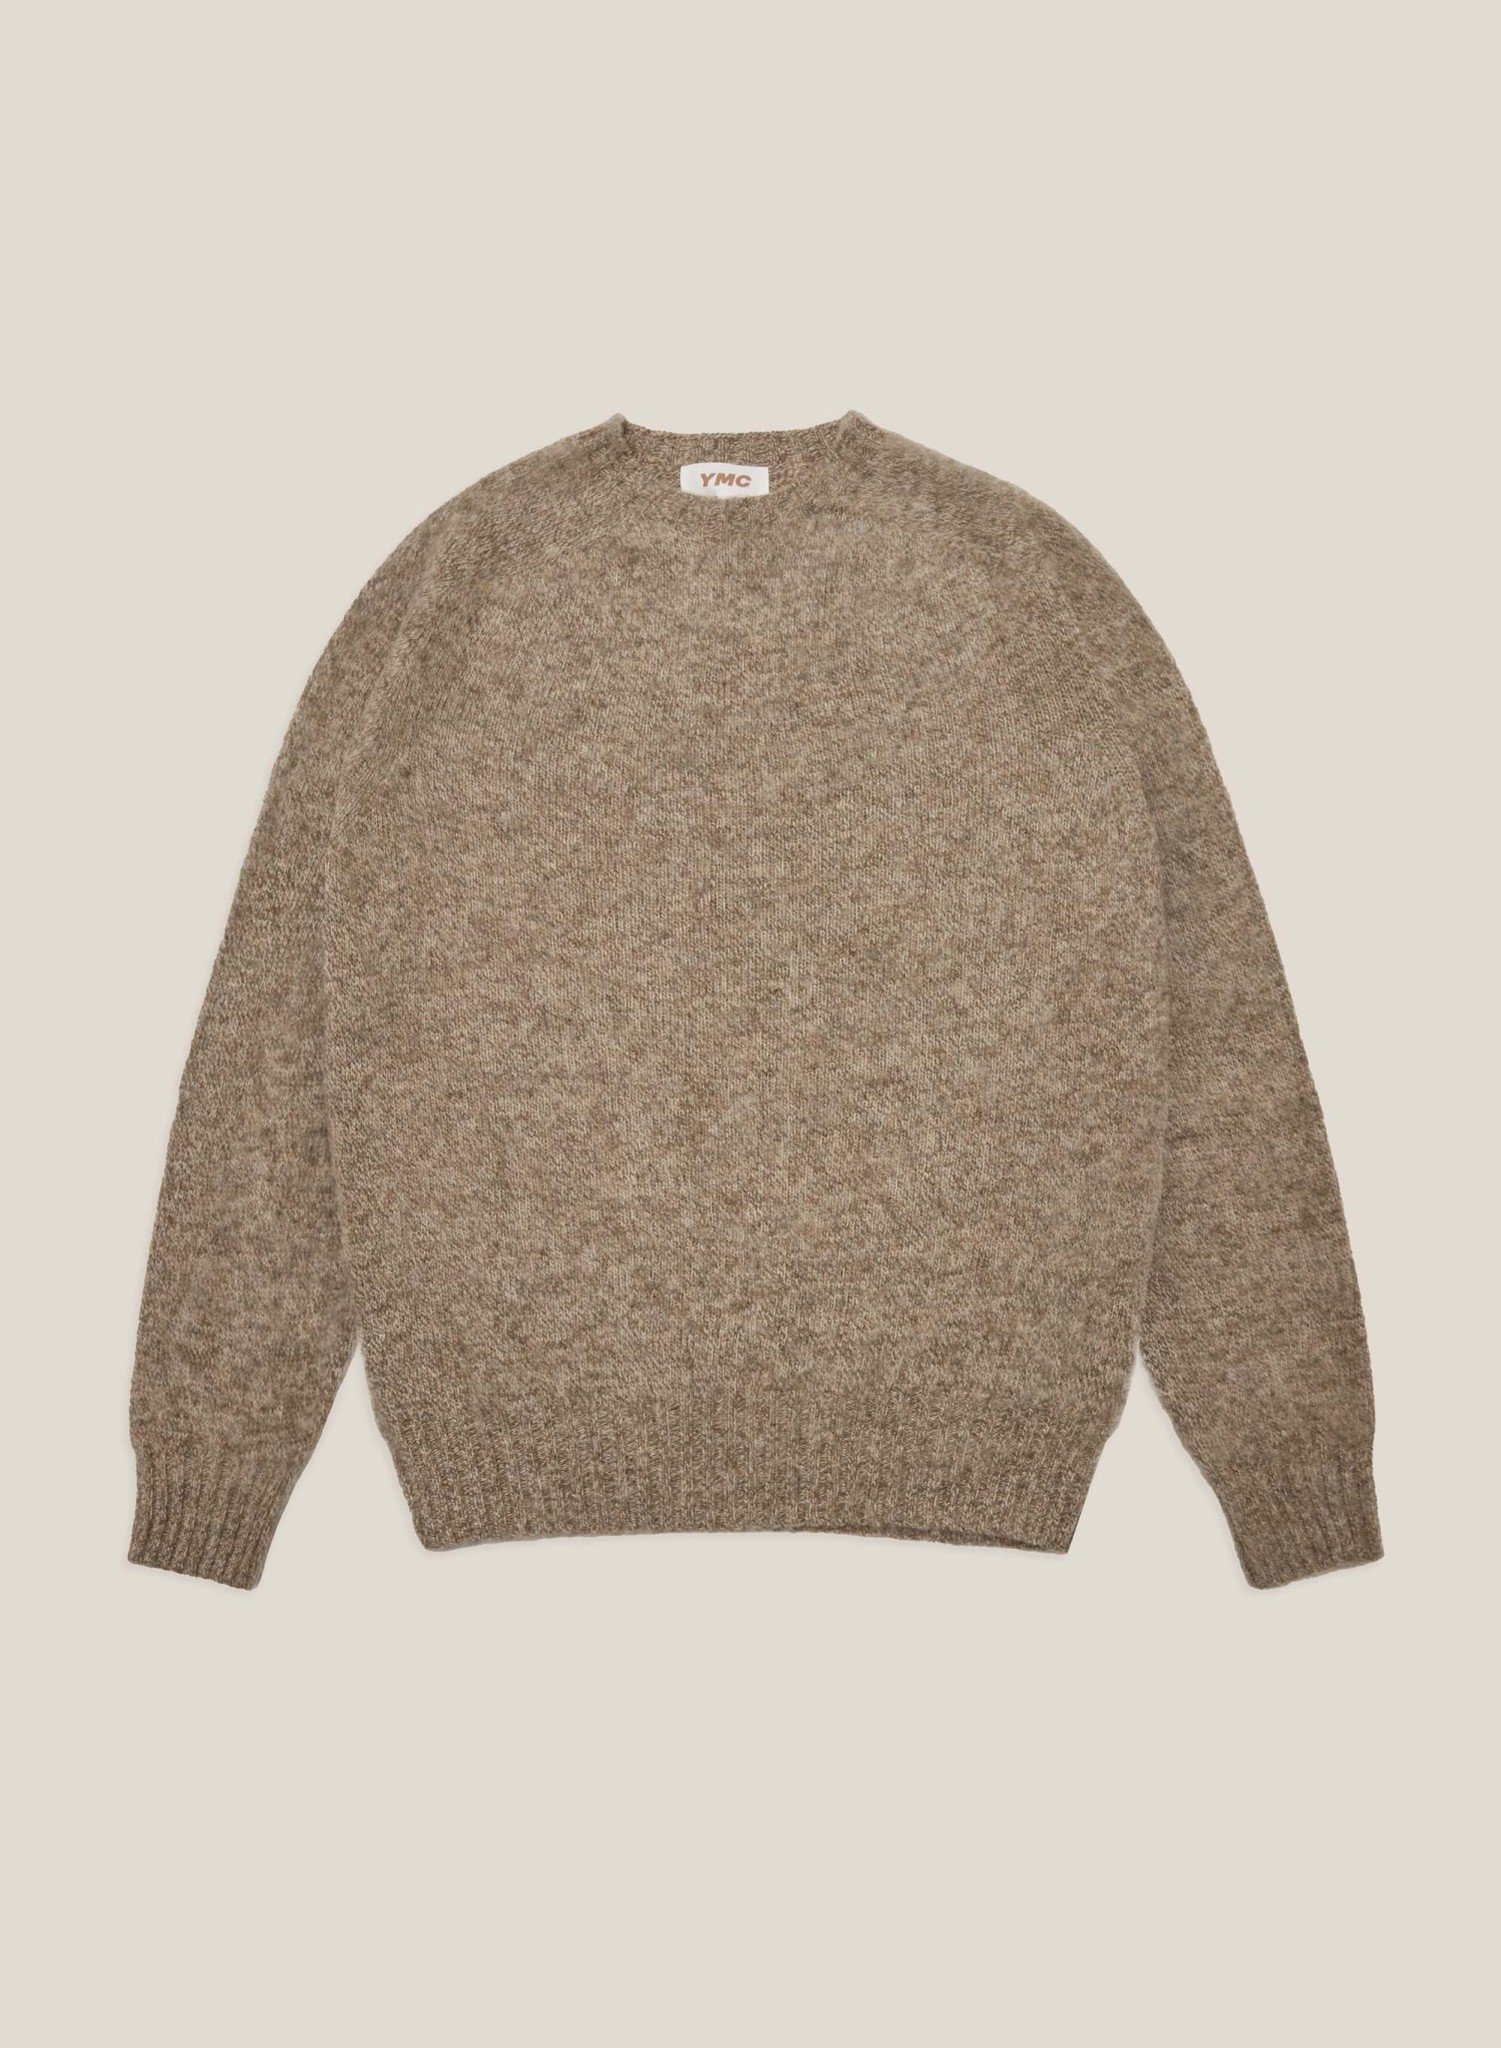 Suedehead Crew Neck Knit in Natural - Eastwood Ave. Menswear